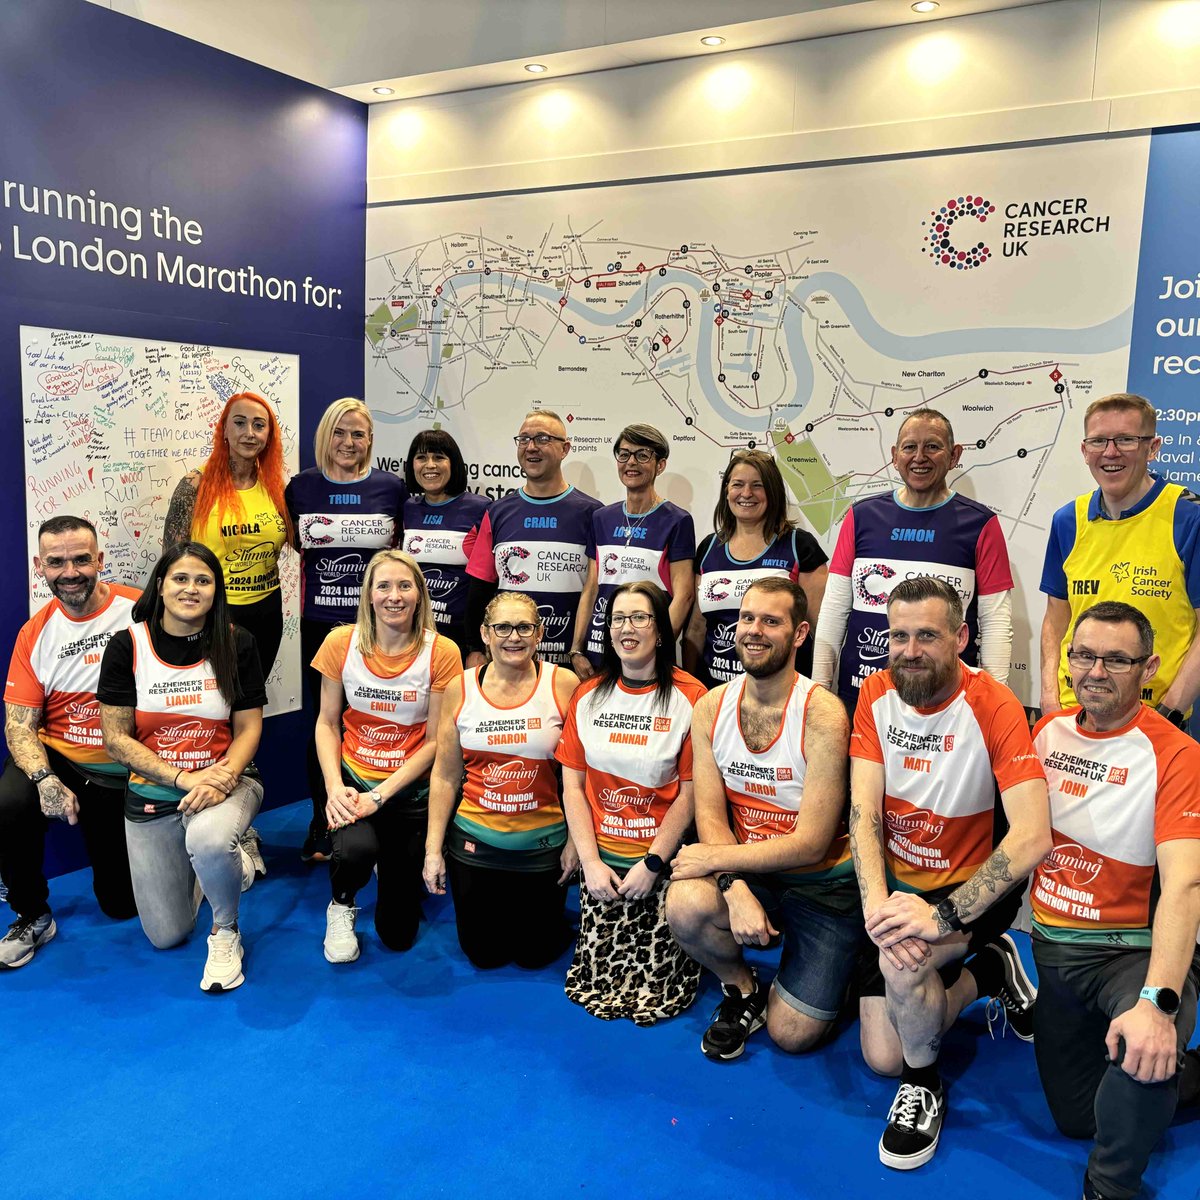 Today’s the day they’ve been training for 🎉! Join us in cheering on our #SWTeam2024 superstars as they take on the London Marathon in support of @CR_UK @AlzResearchUK and the @IrishCancerSoc 🧡💜💛!